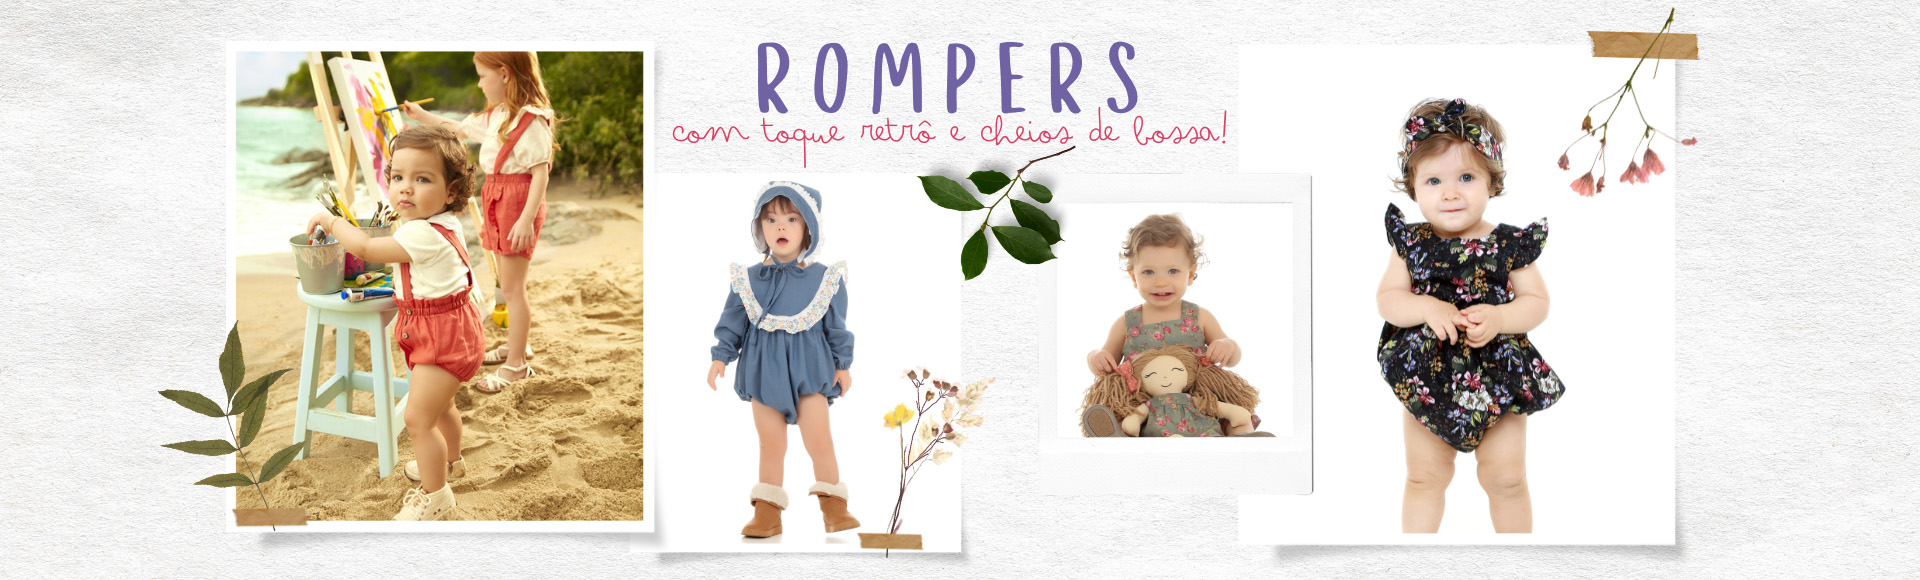 rompers mobile